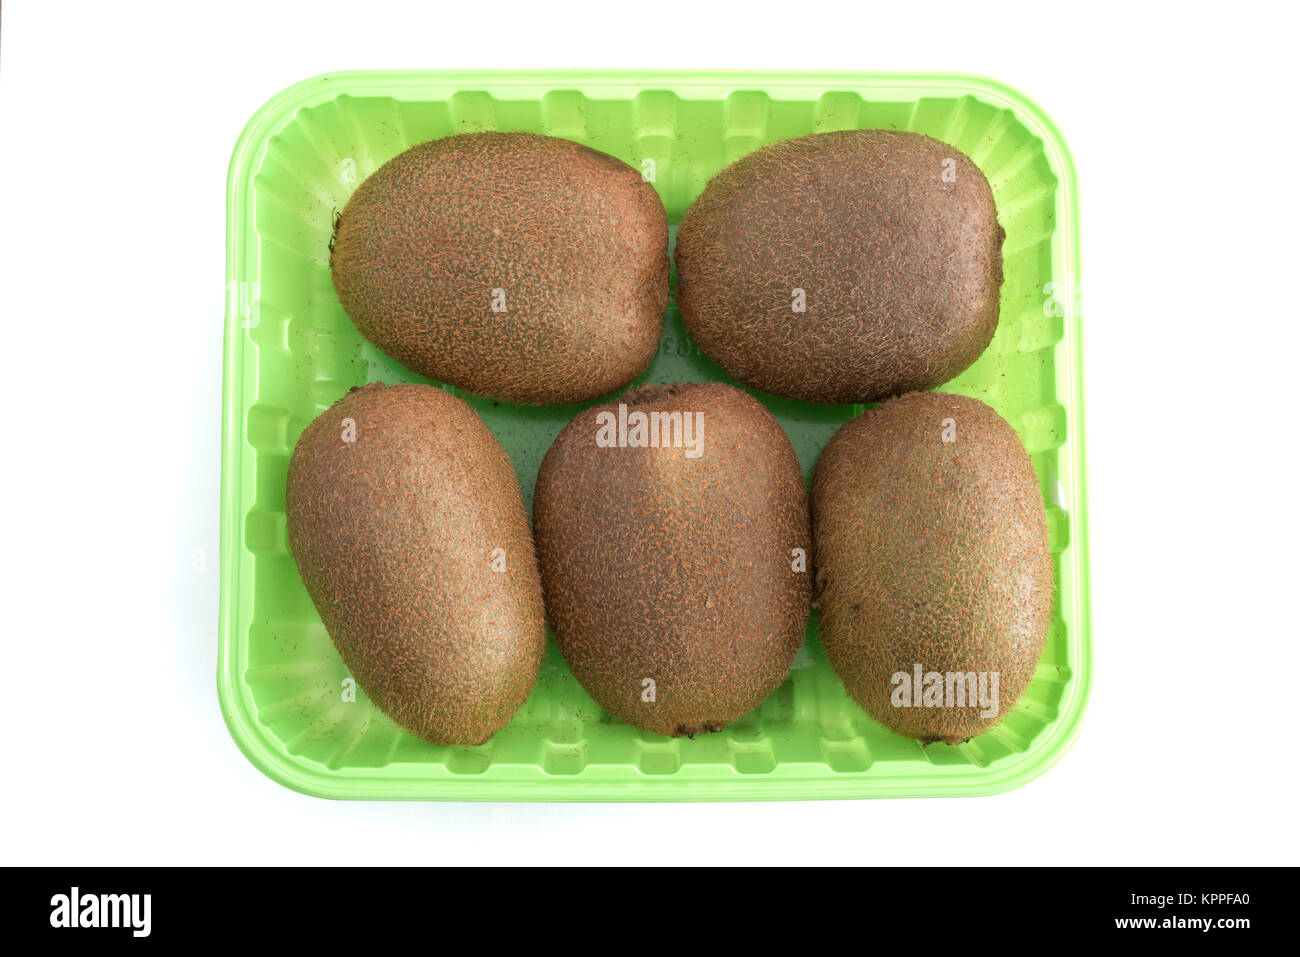 Five Kiwi fruits in a green box isolated on white background Stock Photo